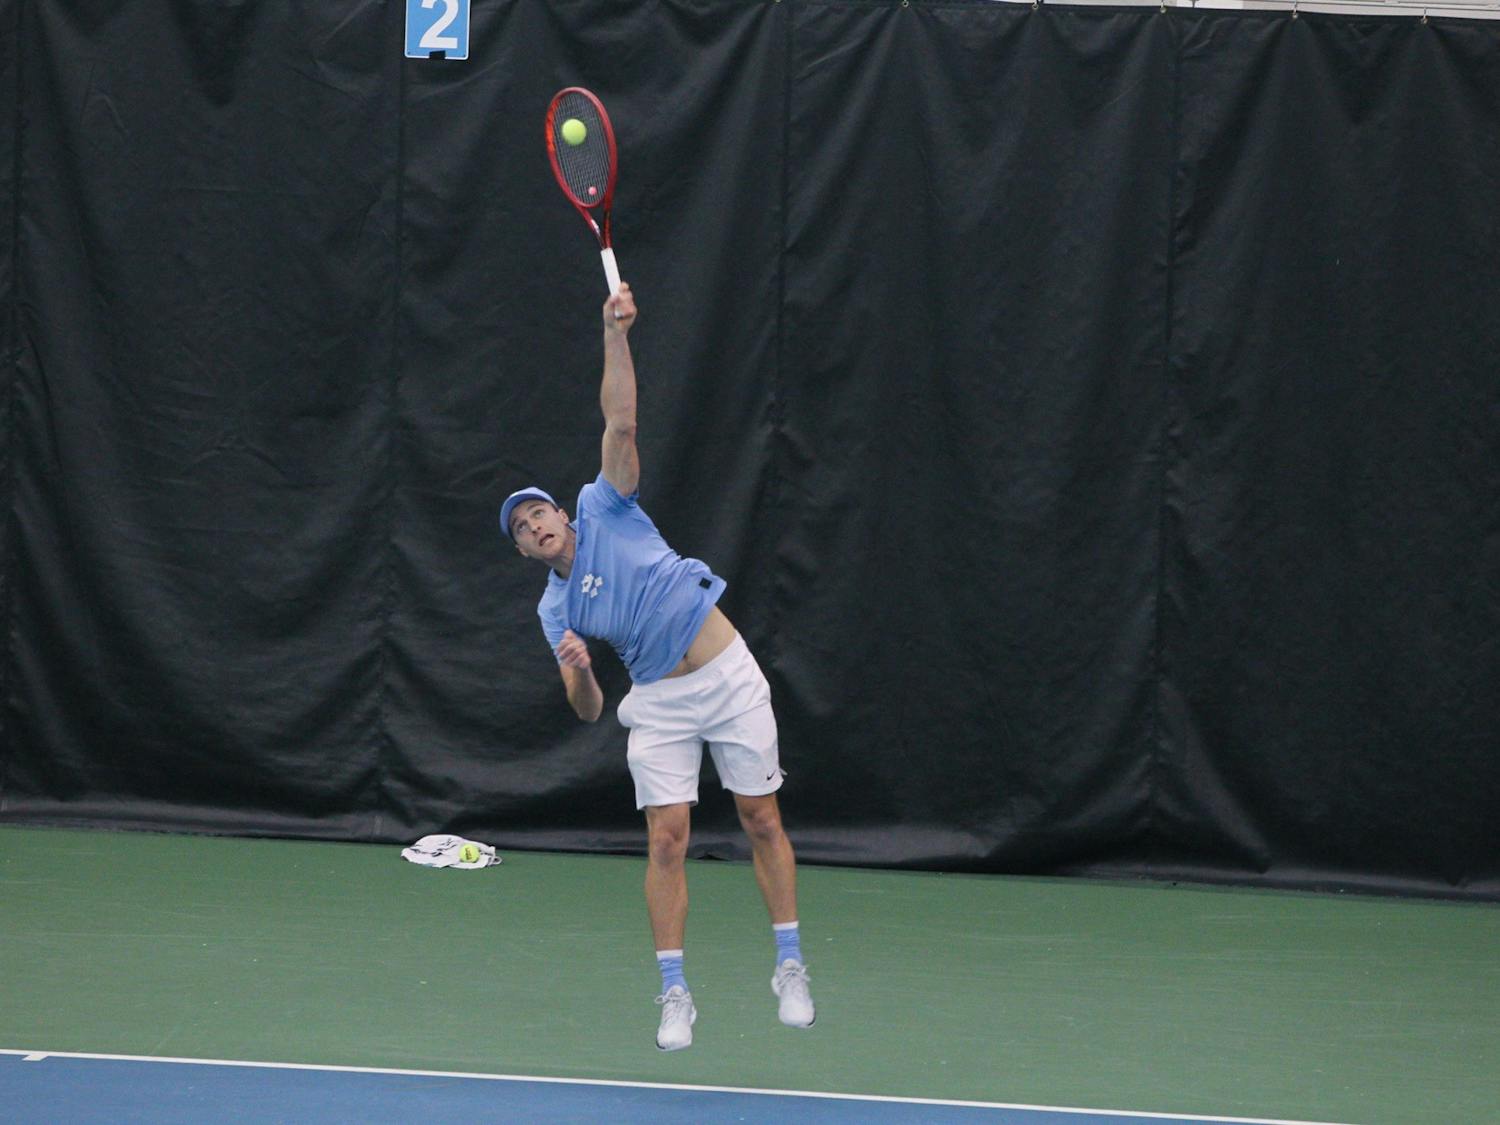 UNC senior Brian Cernoch serves during the Tar Heels’ 4-2 victory over South Carolina in the Cone-Kenfield Tennis Center on Feb. 13, 2022.